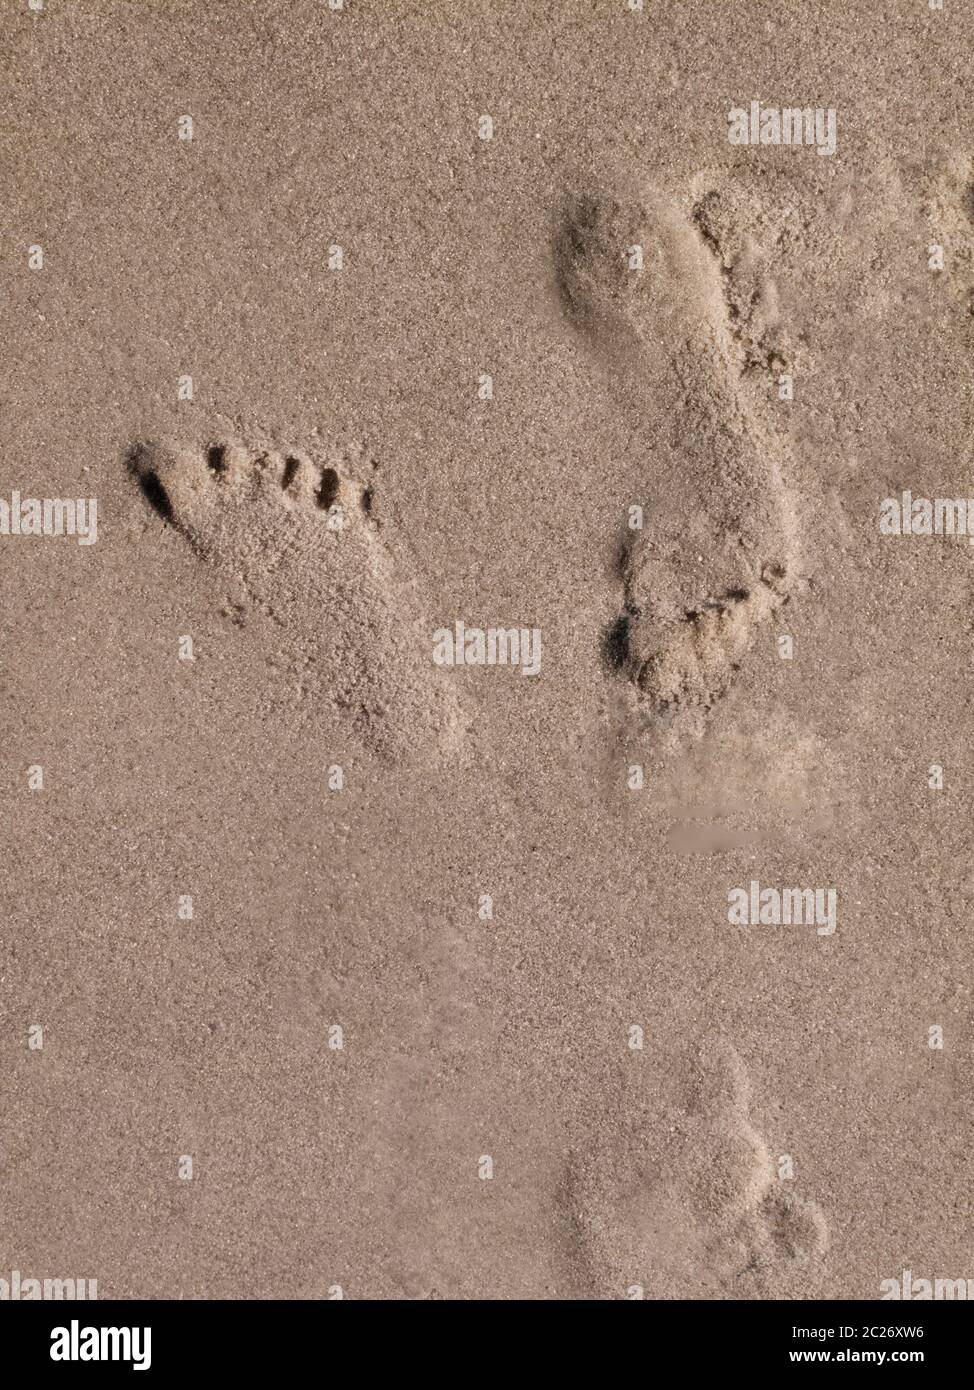 Footprints in sand on beach Banque D'Images